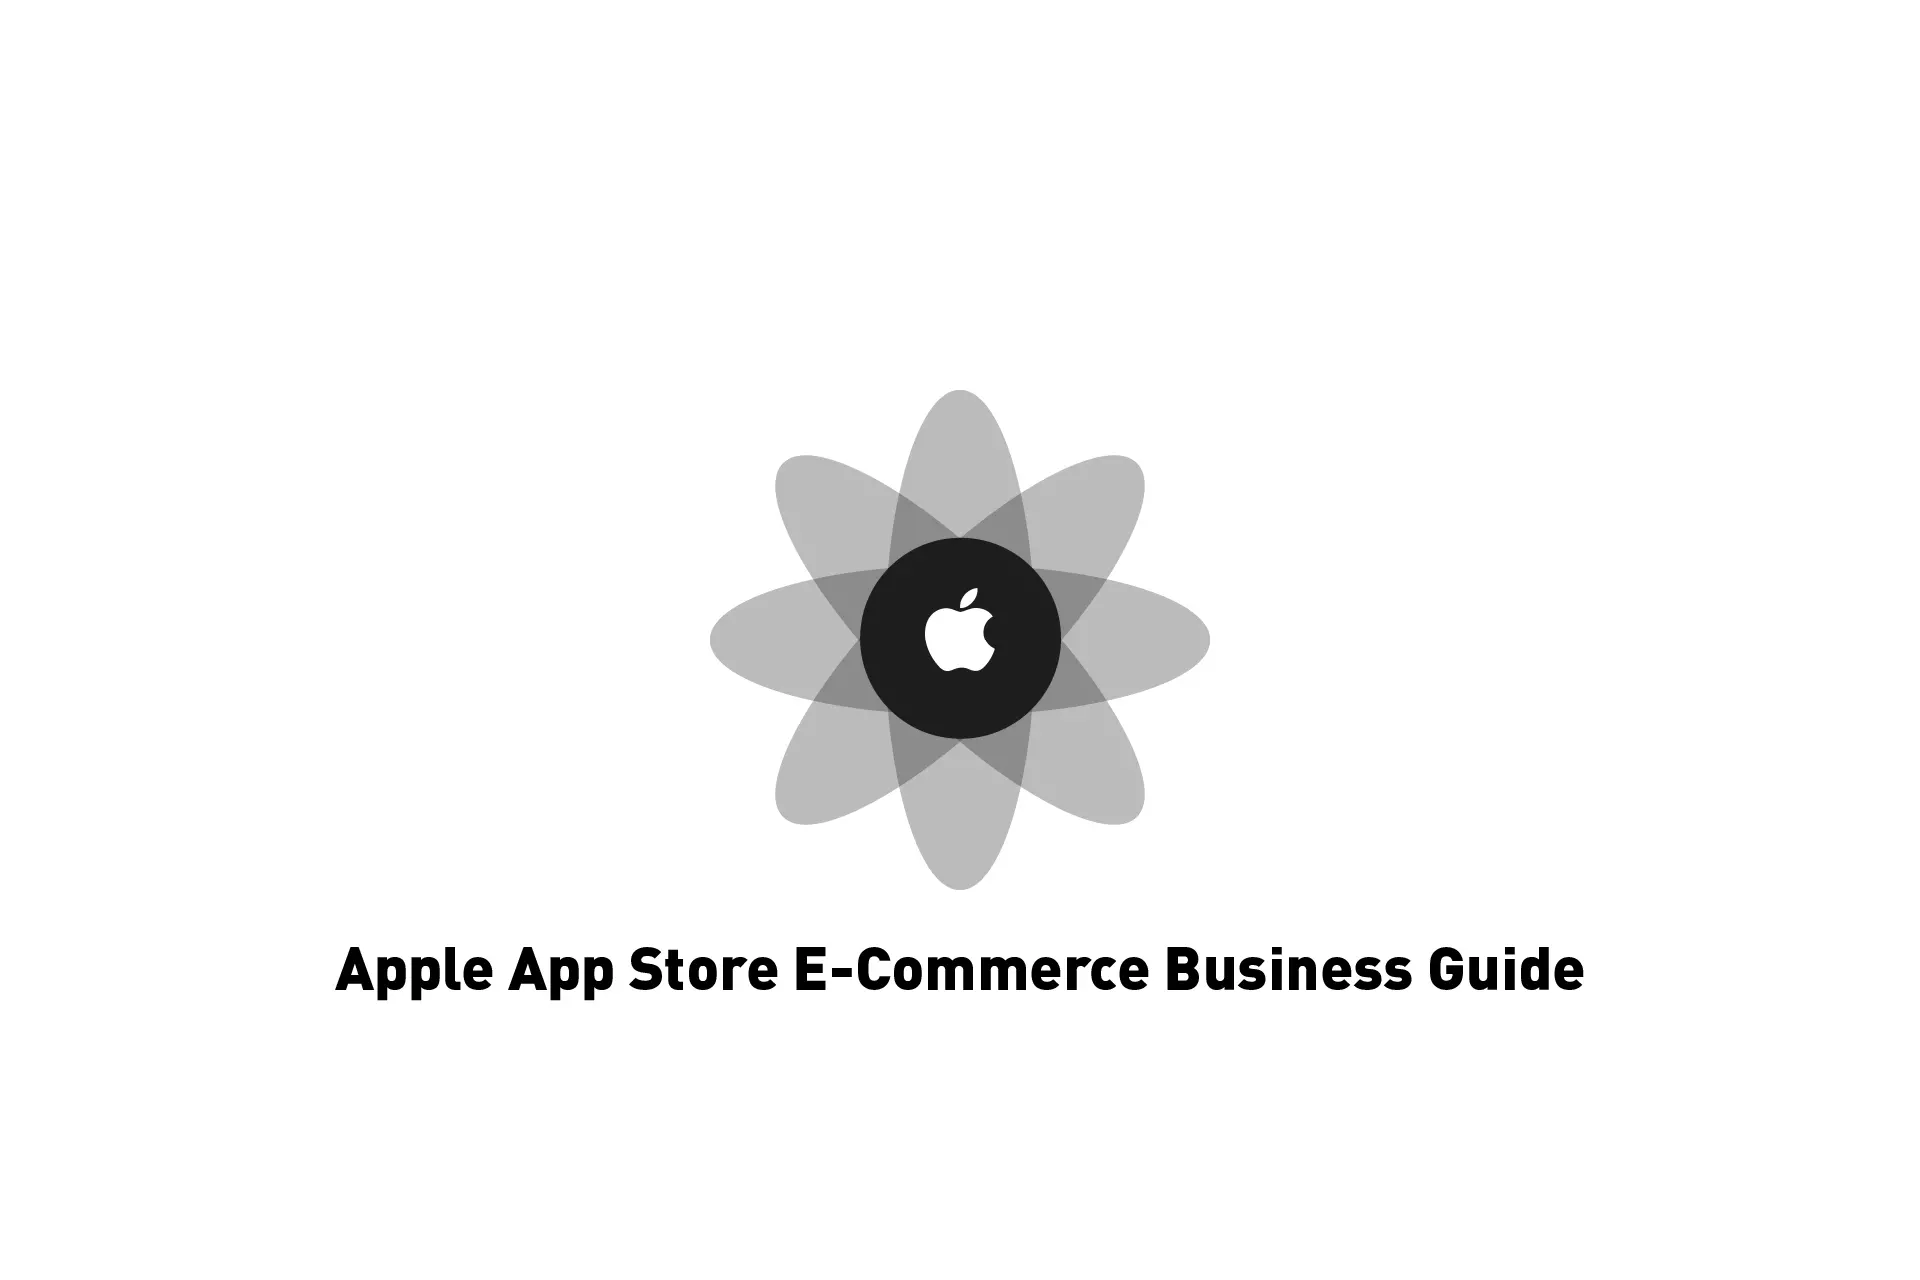 A flower that represents Apple with the text "Apple App Store E-Commerce Business Guide" beneath it.